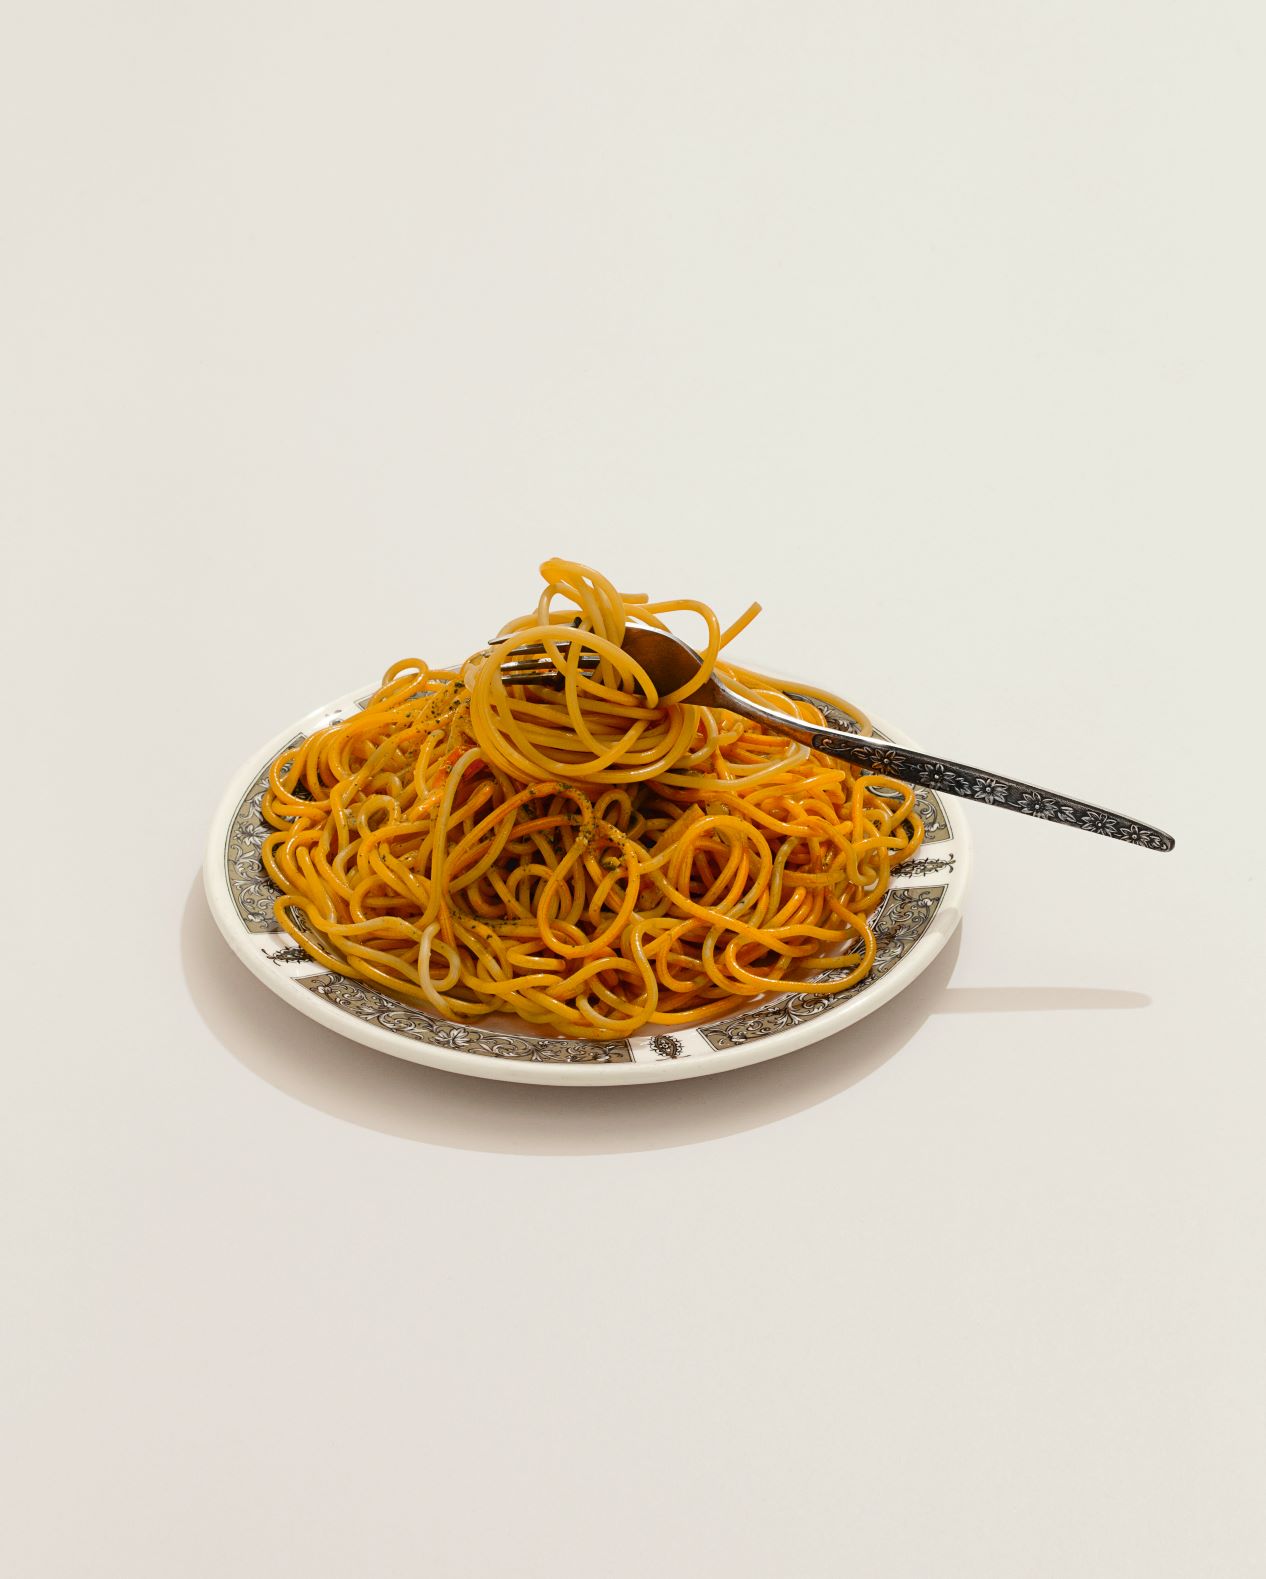 A Wax Plate of Spaghetti. From Paul Smith